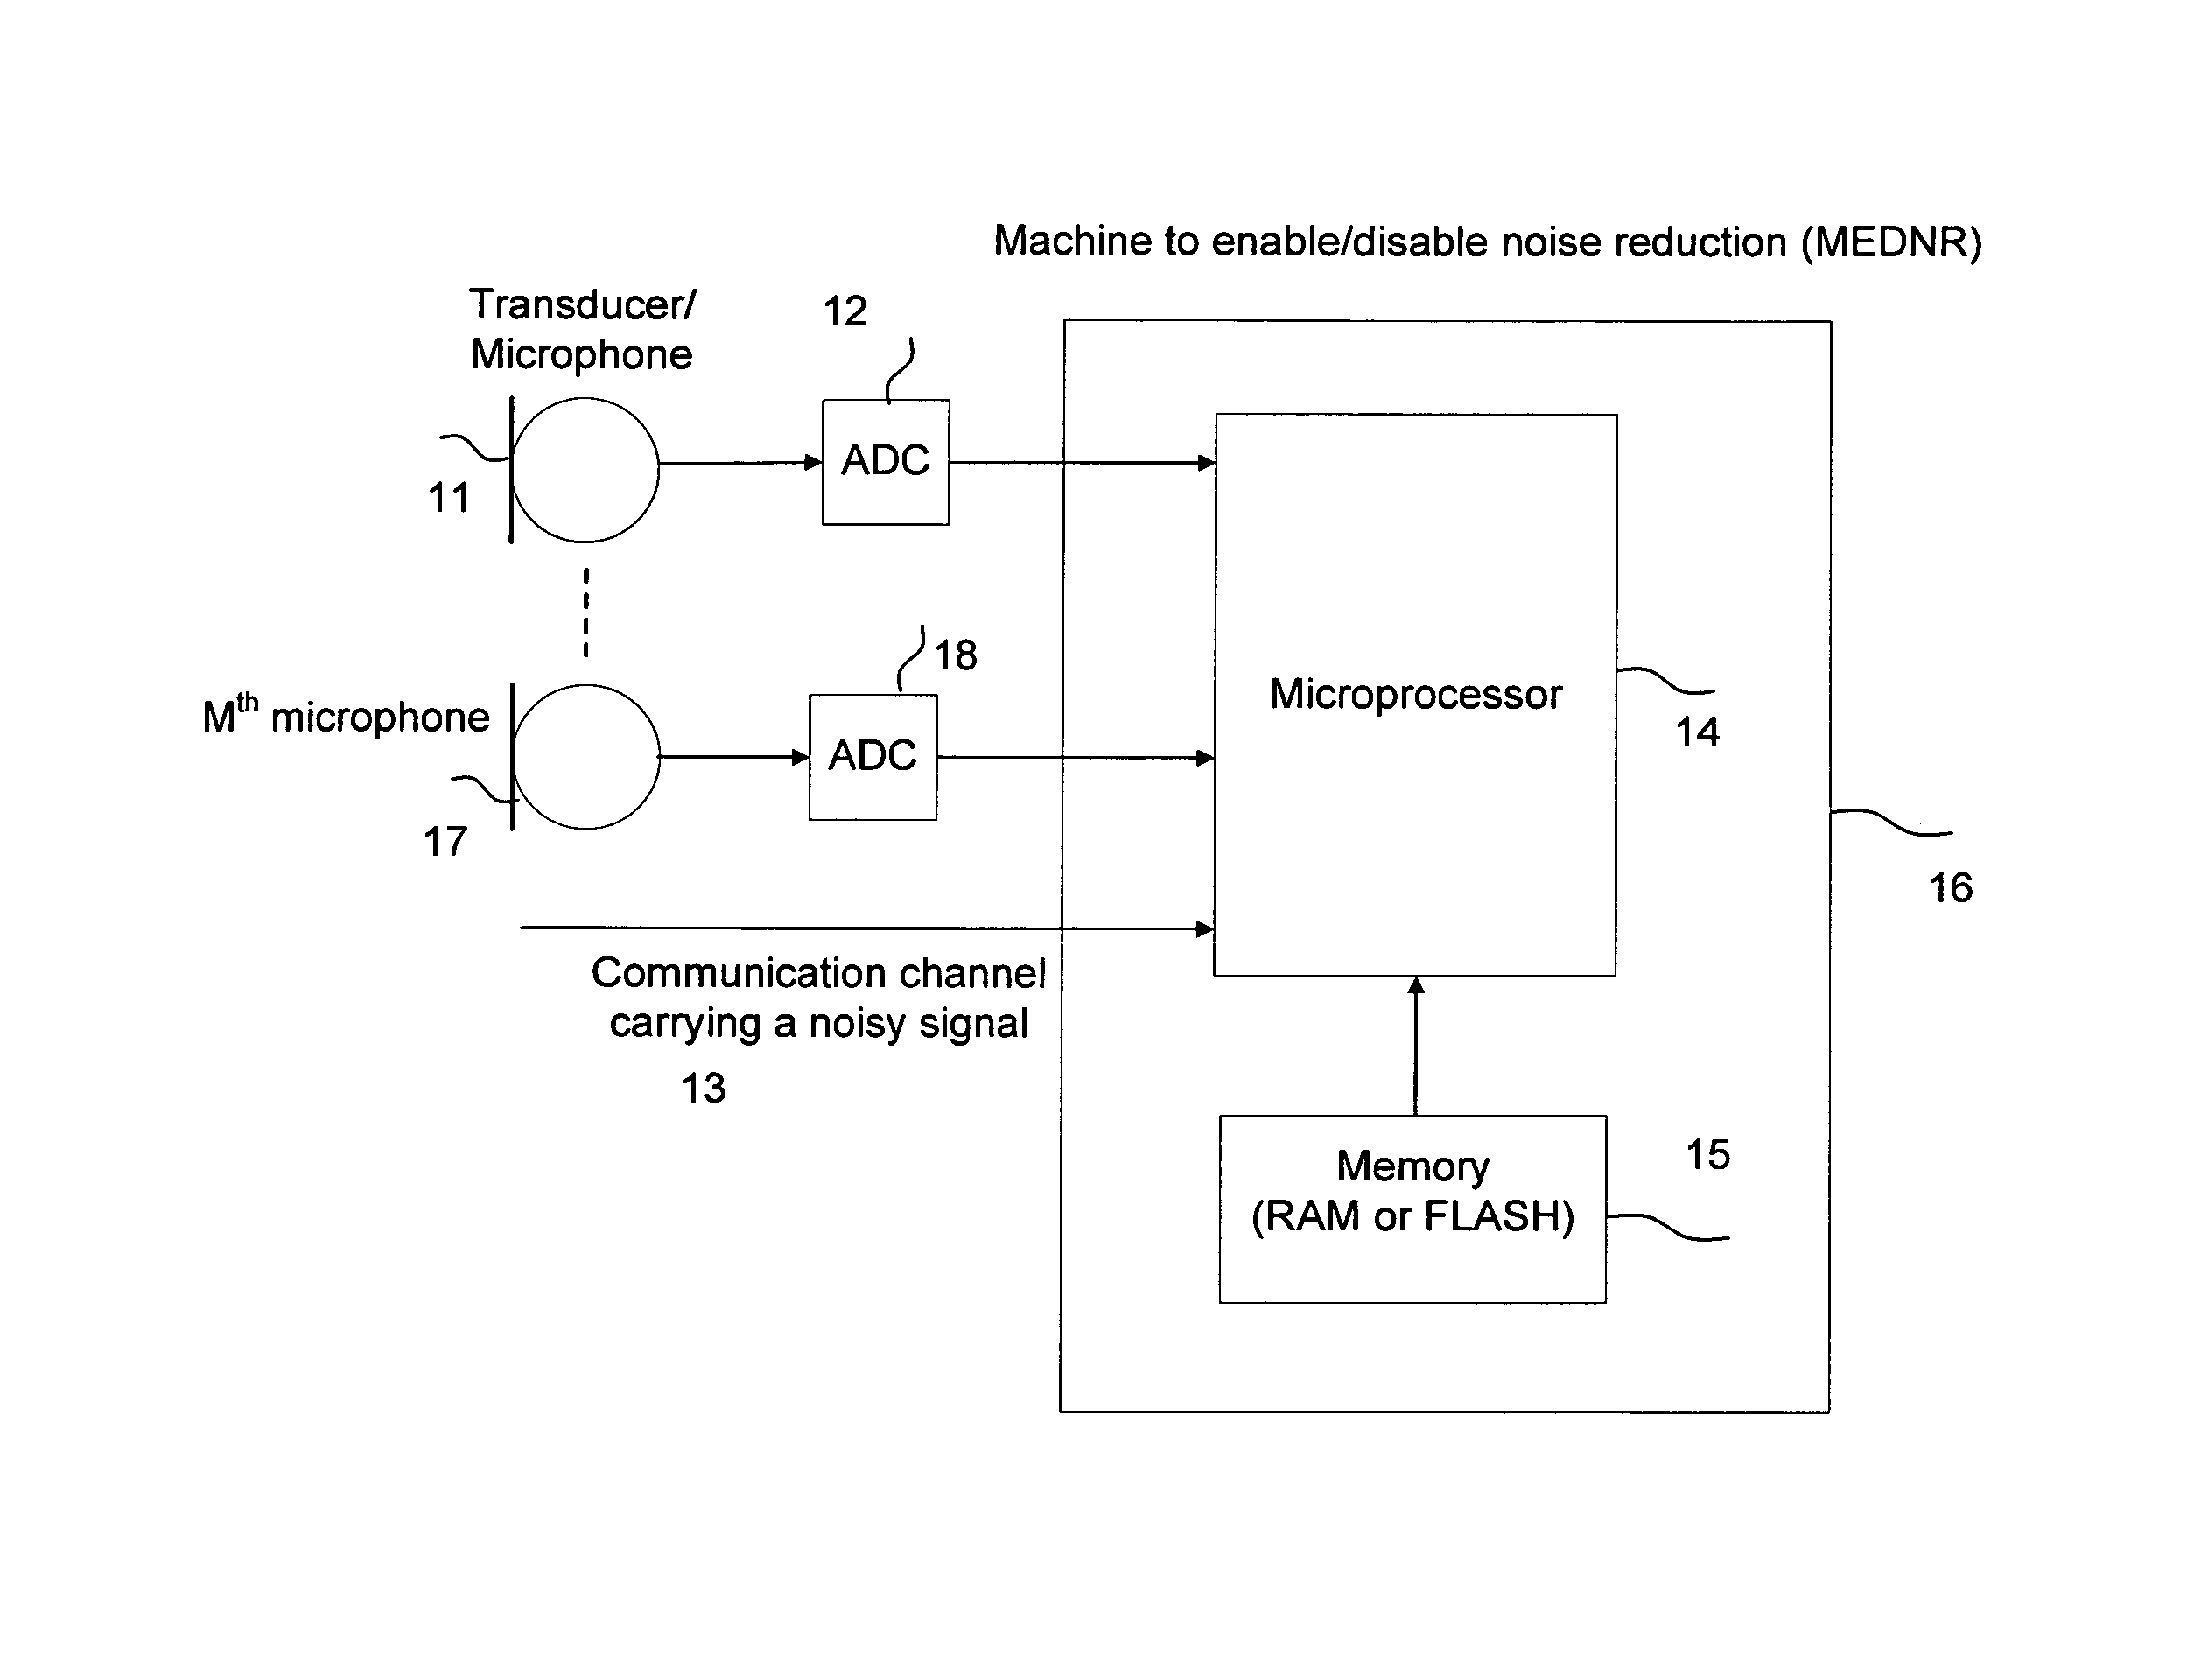 Machine for enabling and disabling noise reduction (MEDNR) based on a threshold